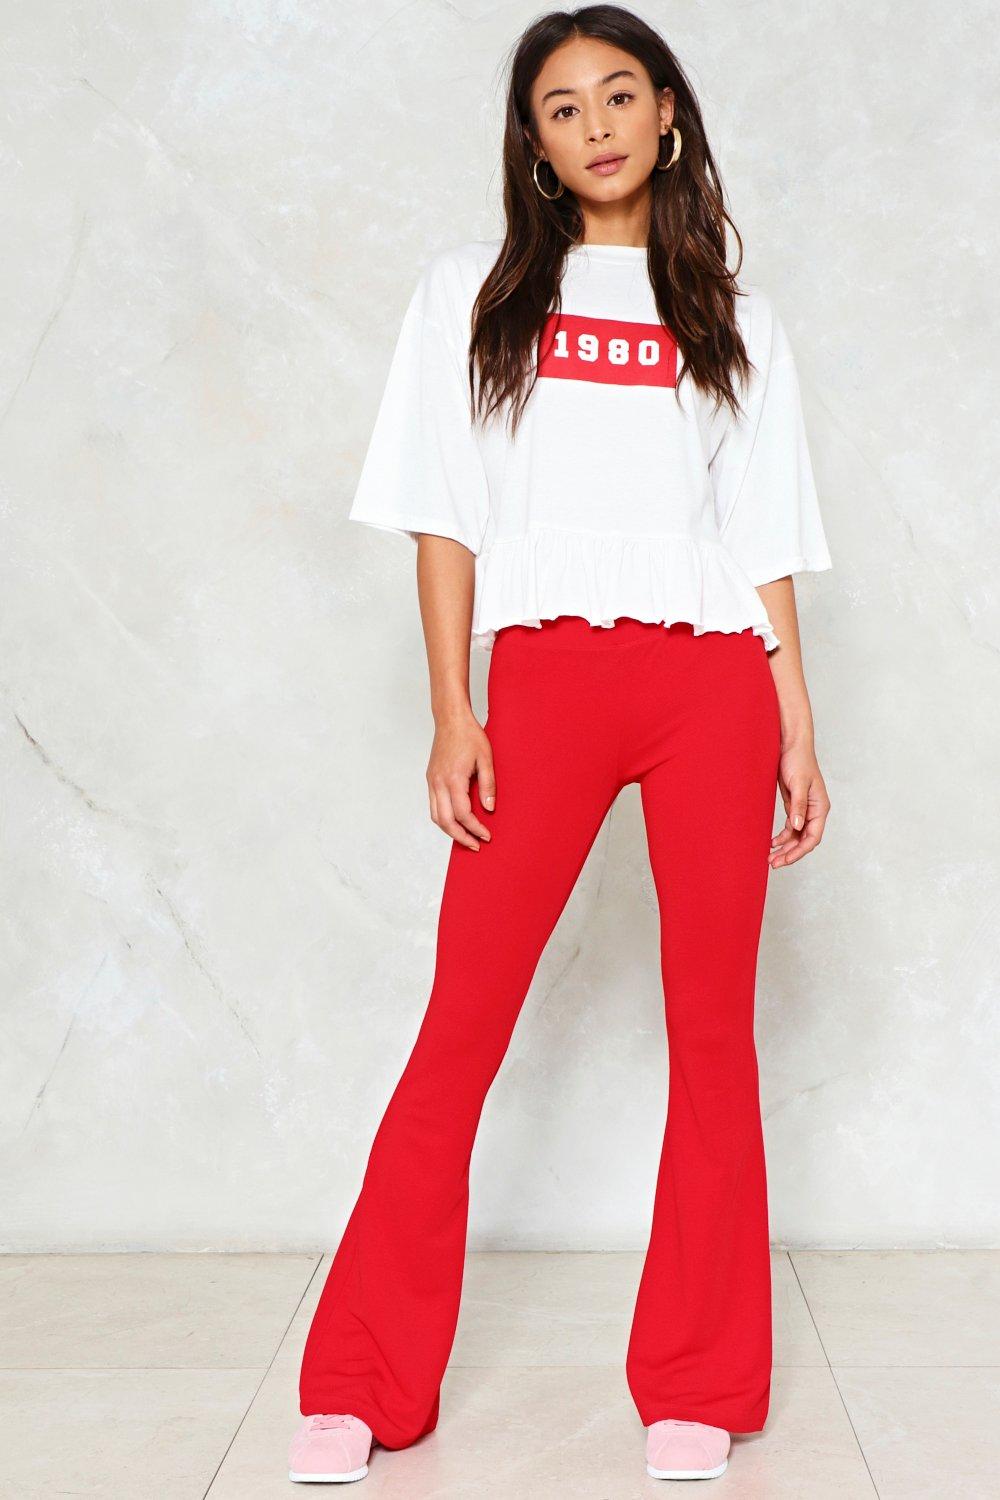 pants that flare out